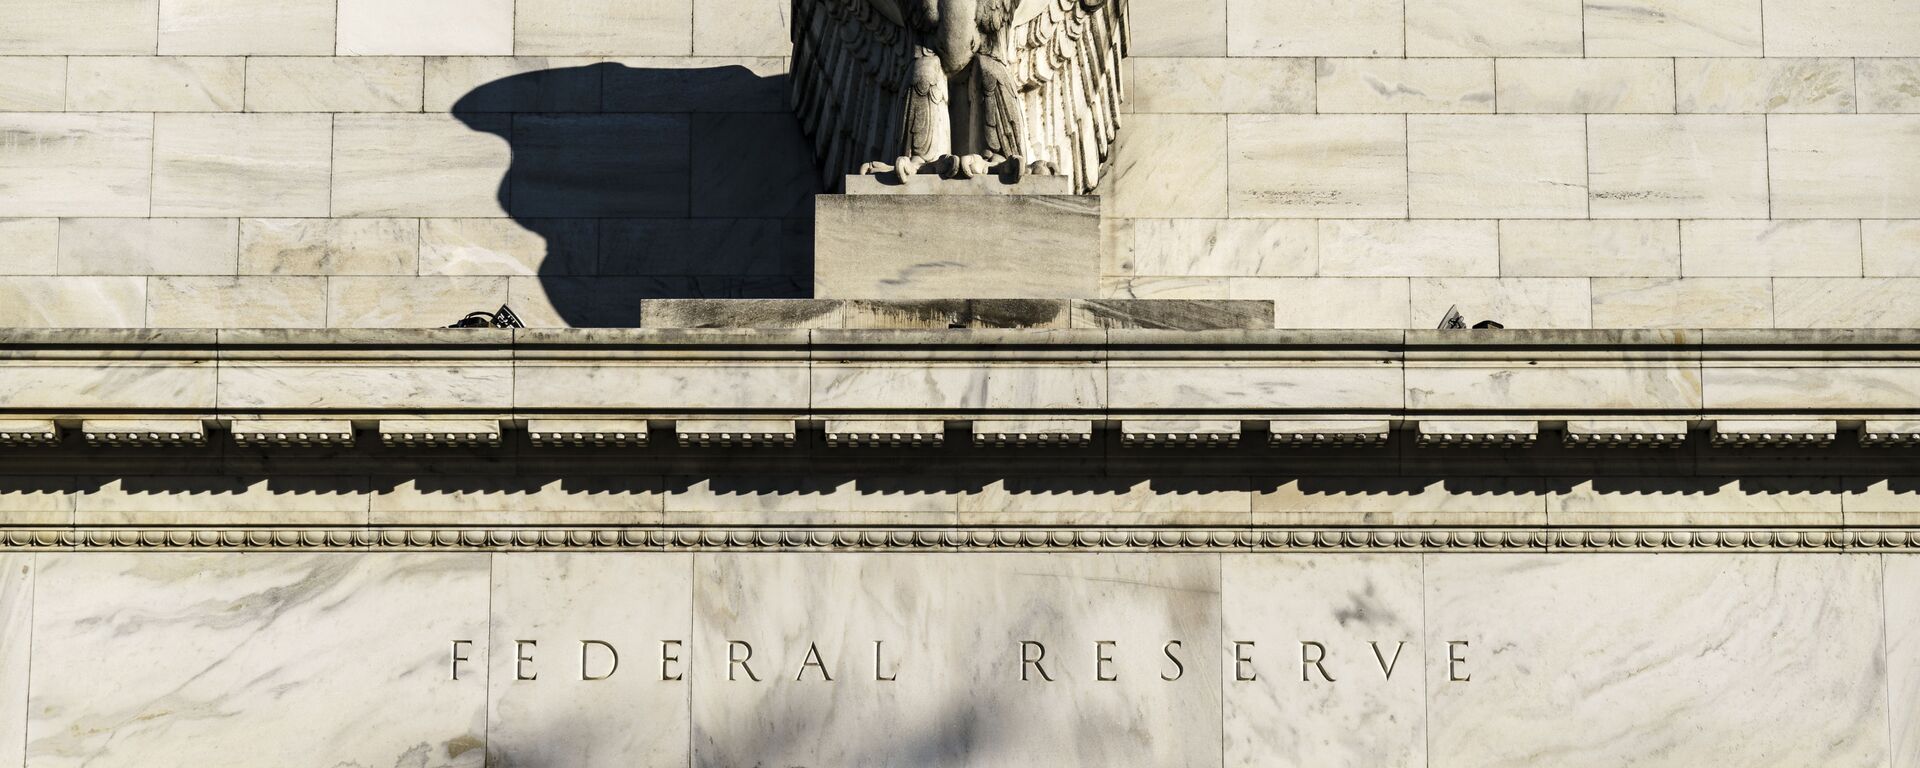 The Federal Reserve is seen in Washington, Monday, Nov. 16, 2020. President Donald Trump's unorthodox choice for the Federal Reserve Board of Governors, Judy Shelton, could be approved by the Senate this week, according to Majority Leader Mitch McConnell's office. - Sputnik International, 1920, 05.10.2022